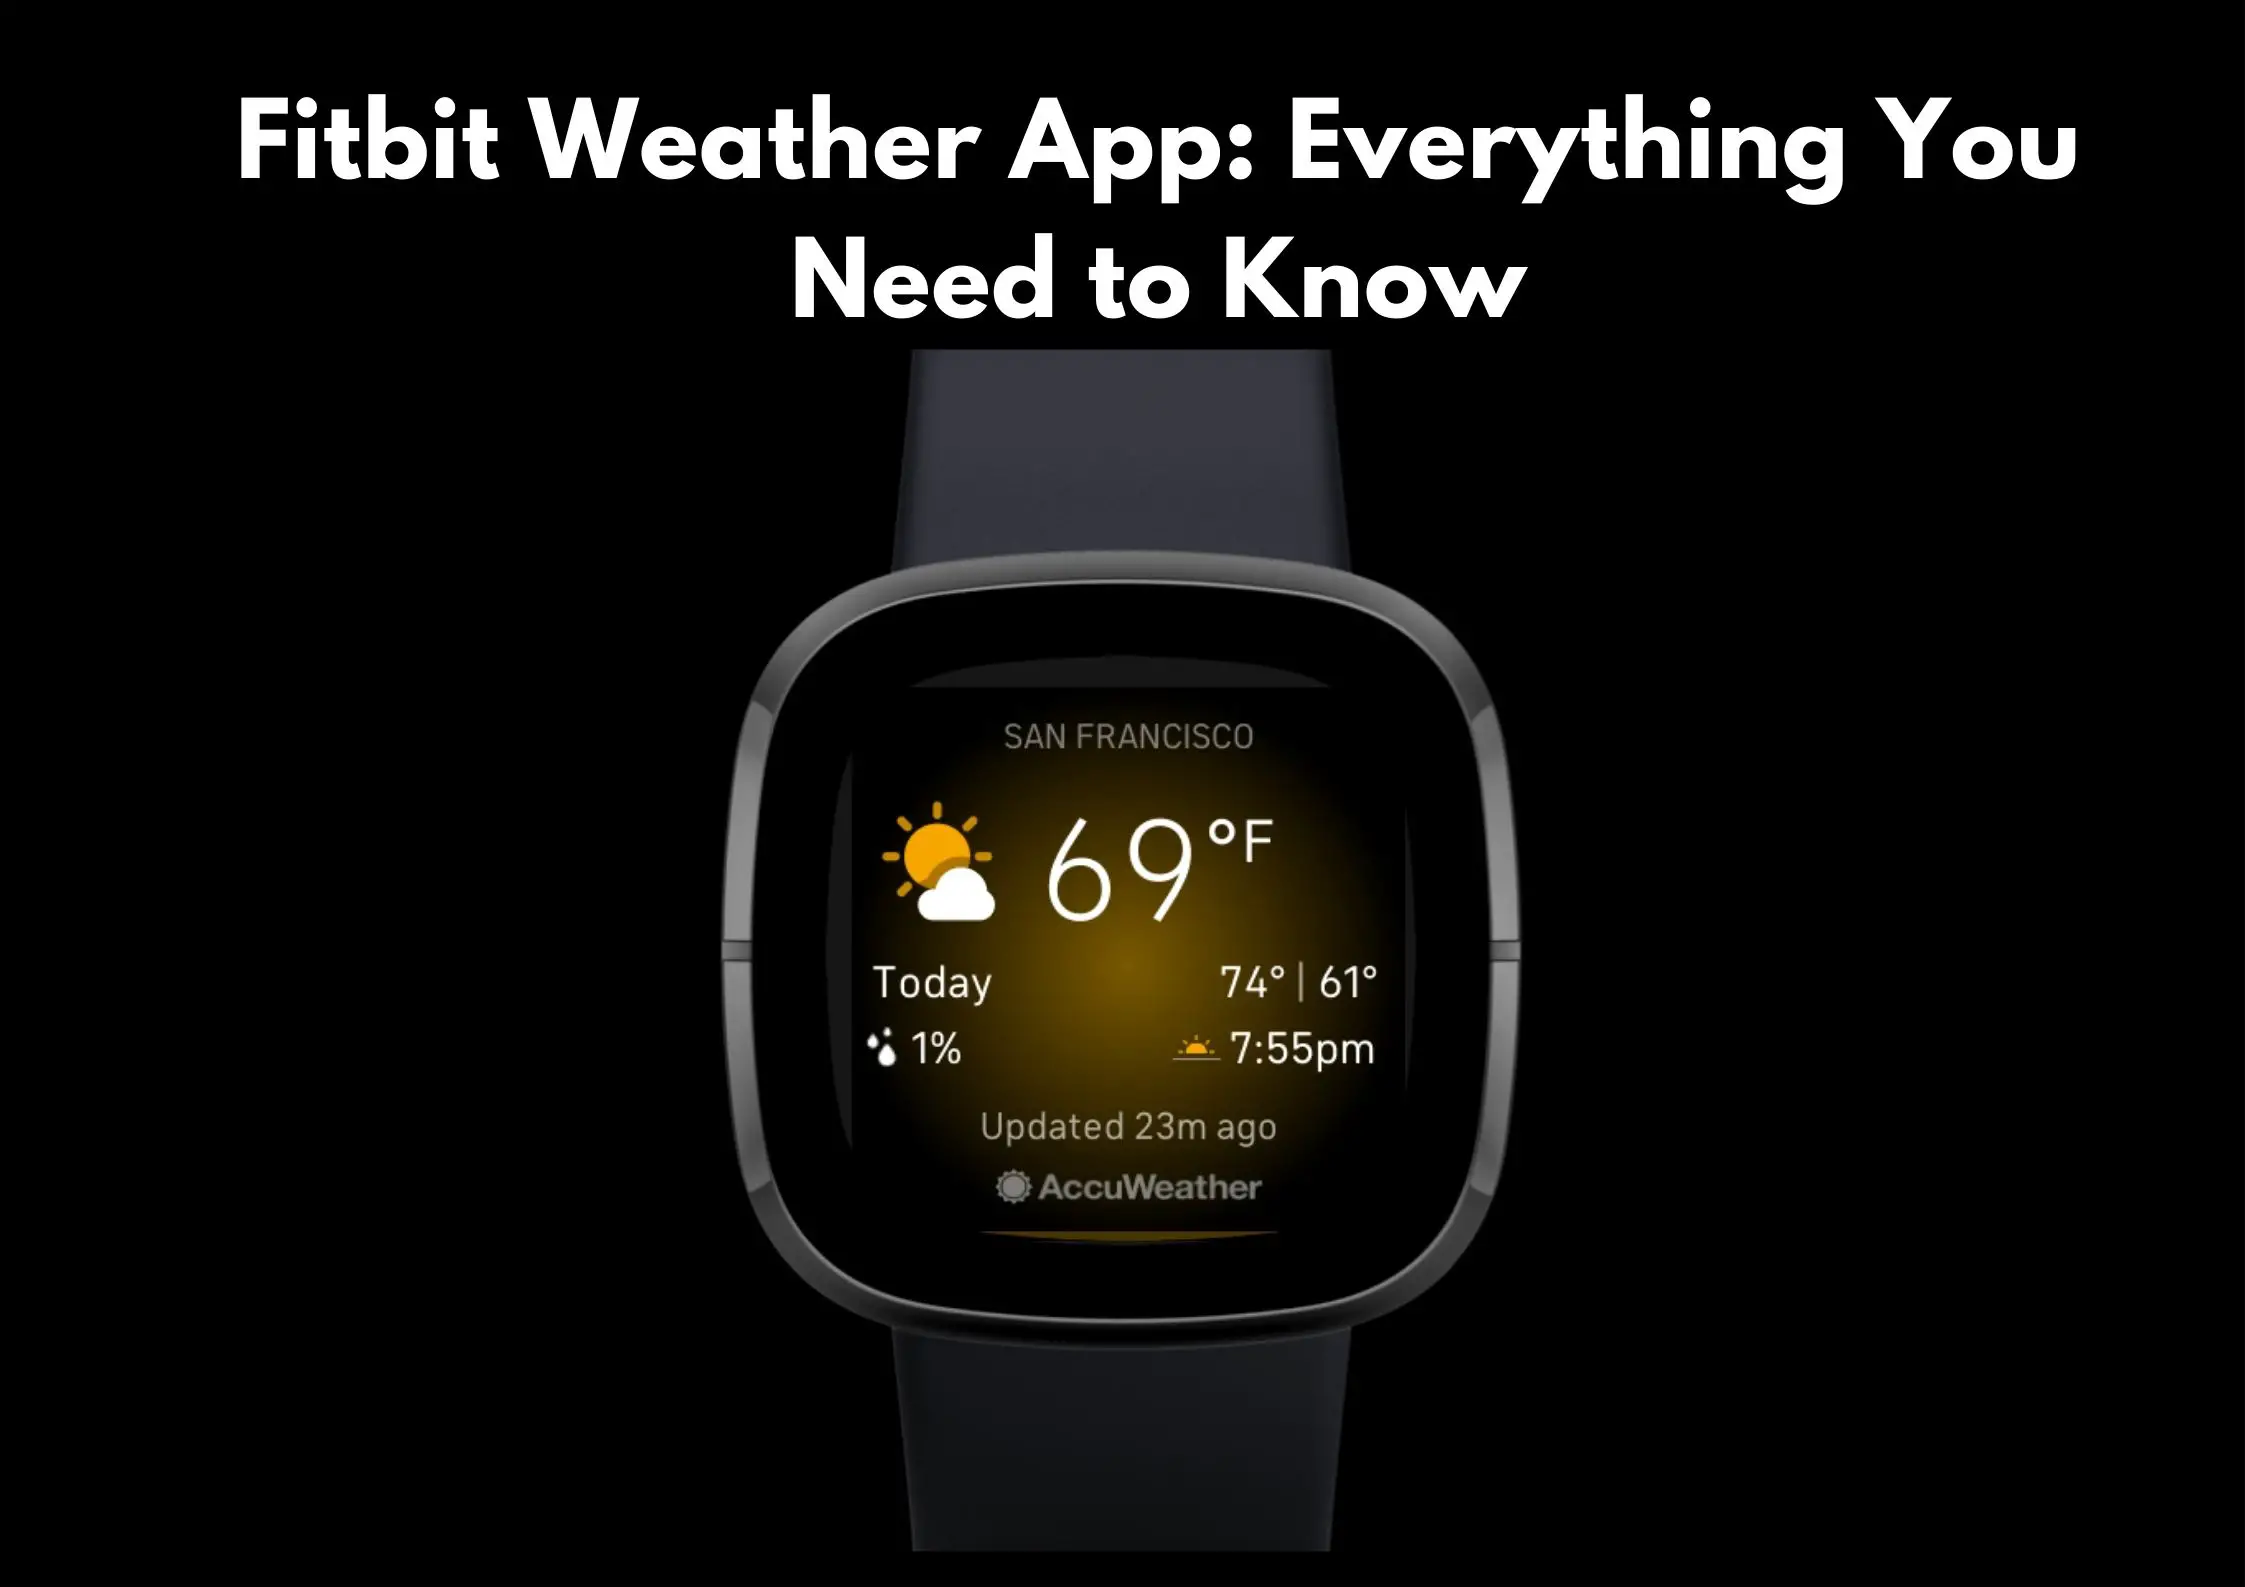 Fitbit Weather App: Everything You Need to Know